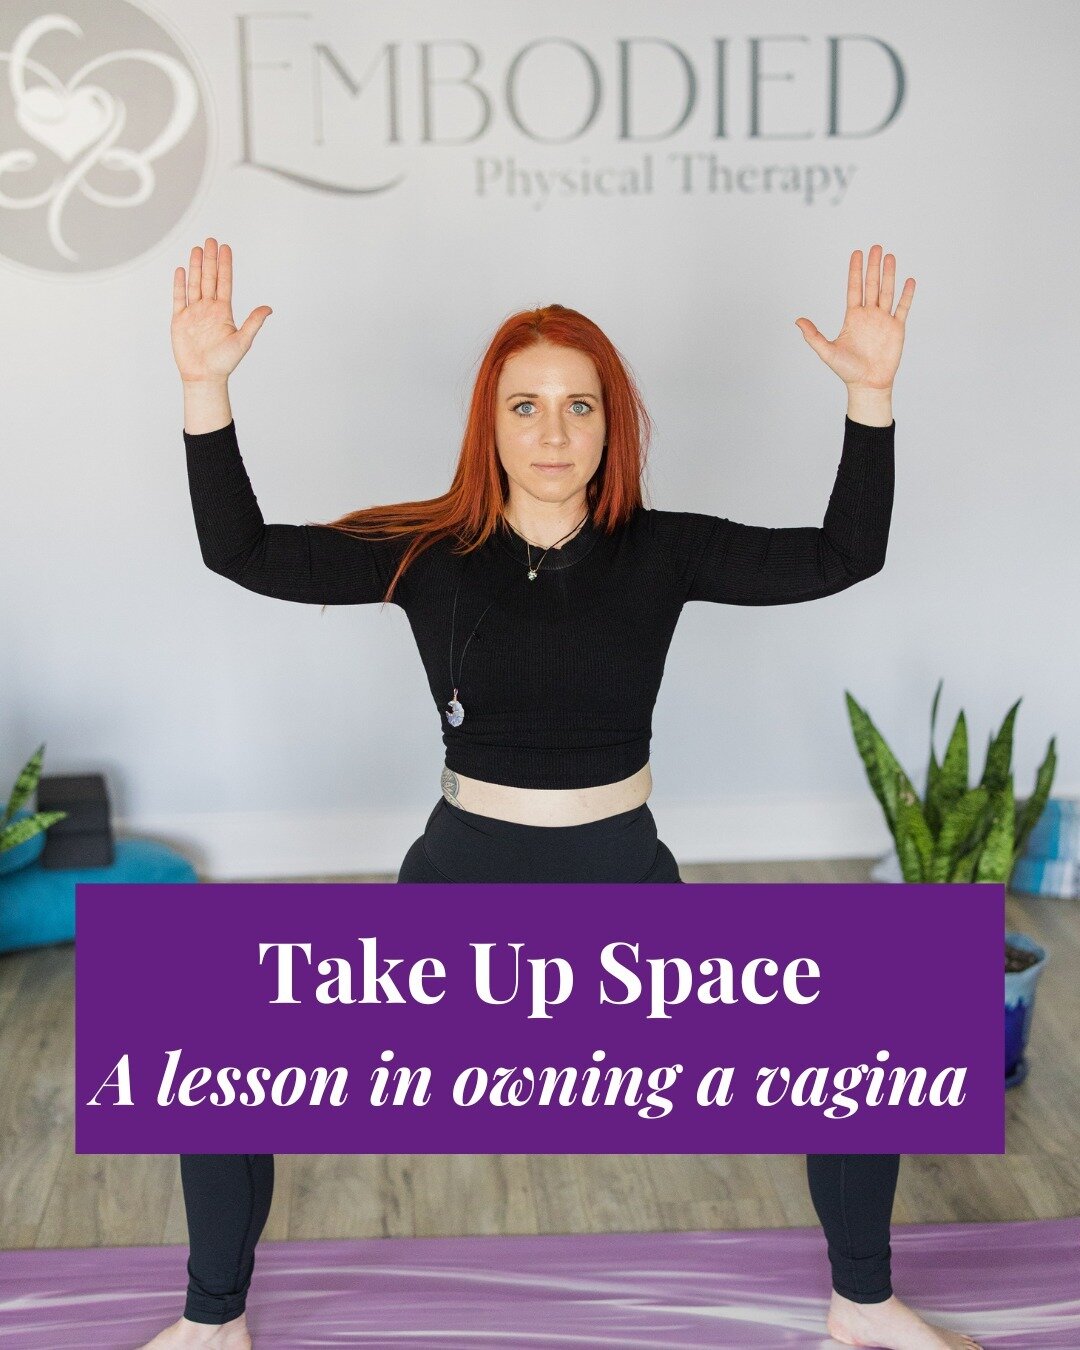 Women are told to stay and be small.⁠
⁠
We're constantly overlooked, medically we're often not listened to and taken advantage of - learning to best take up space, how to advocate for ourselves and our needs is something that we aren't given the oppo